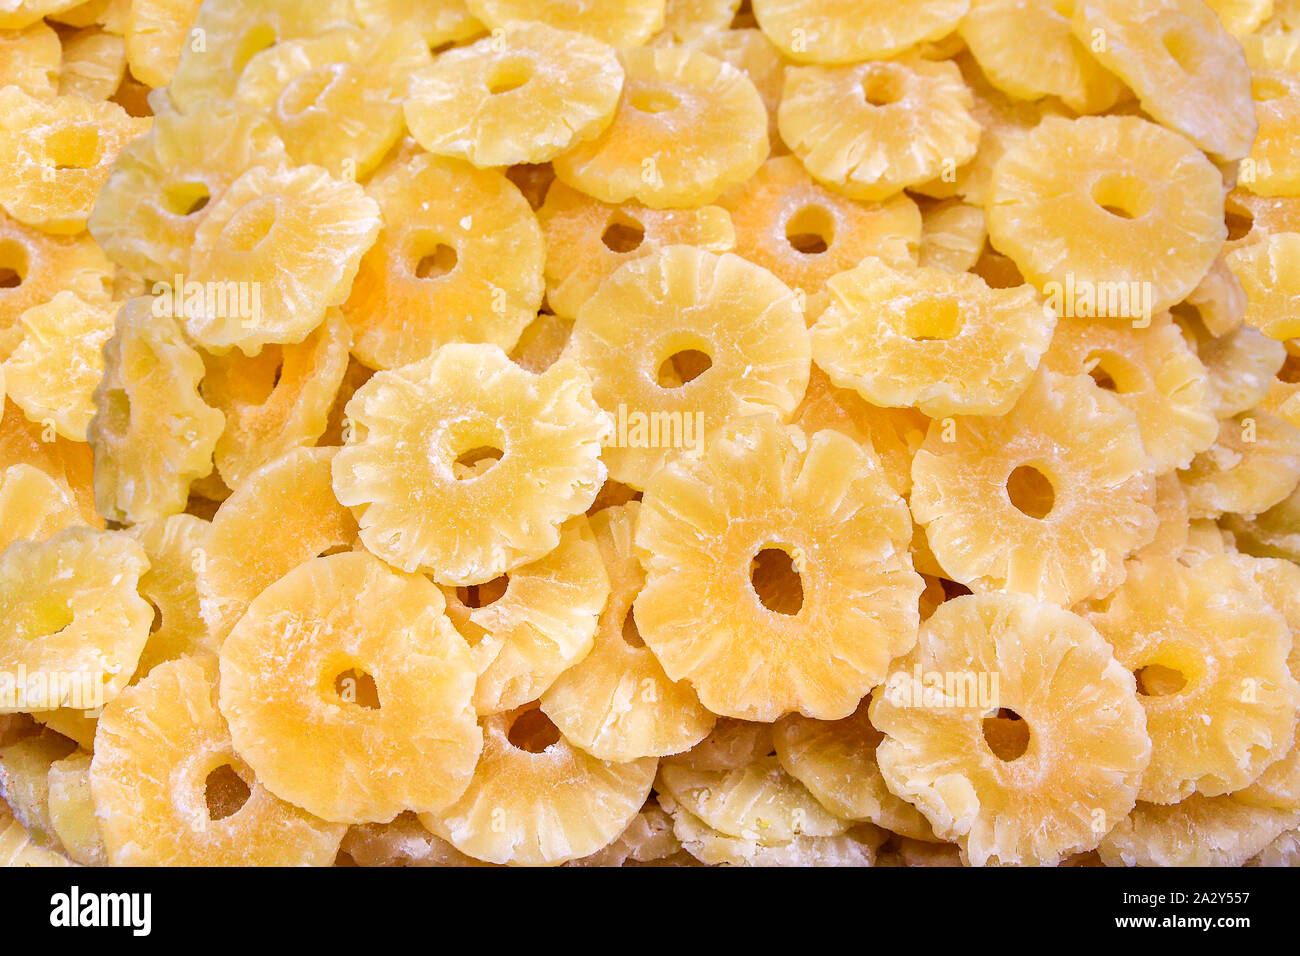 Heap of dry yellow pineapple slices for sale at market Stock Photo